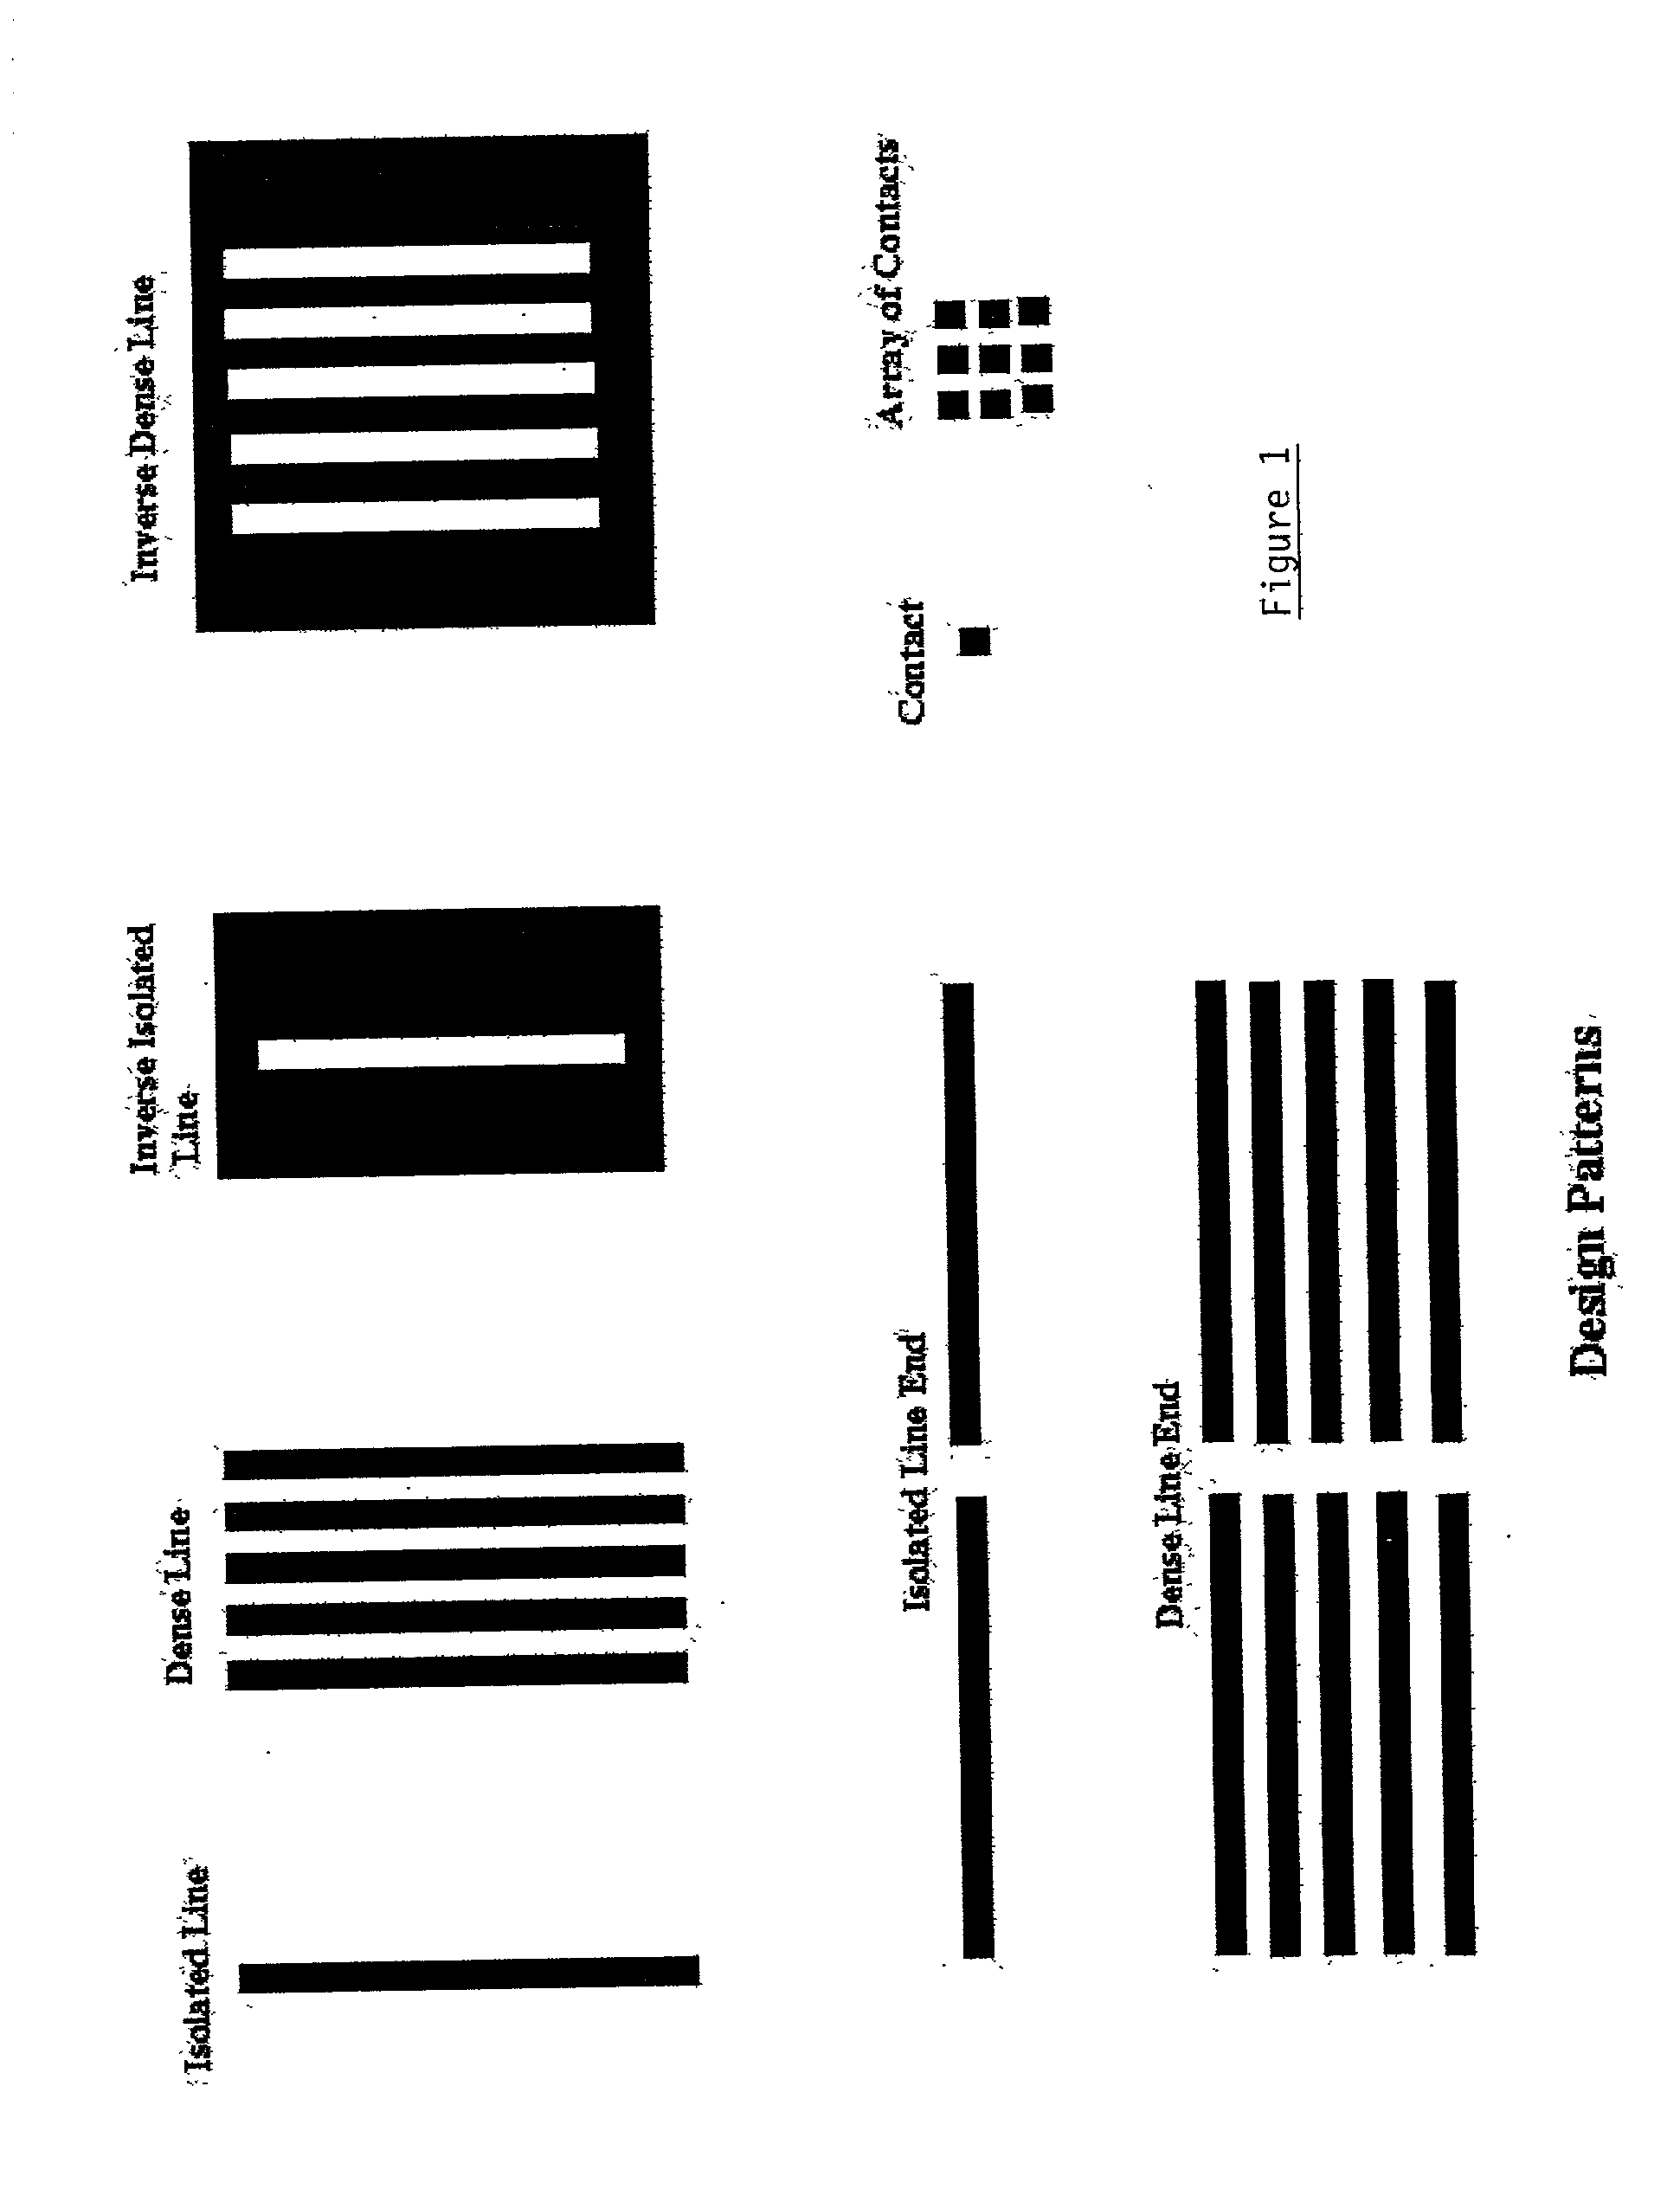 Method for correcting optical proximity effects in a lithographic process using the radius of curvature of shapes on a mask